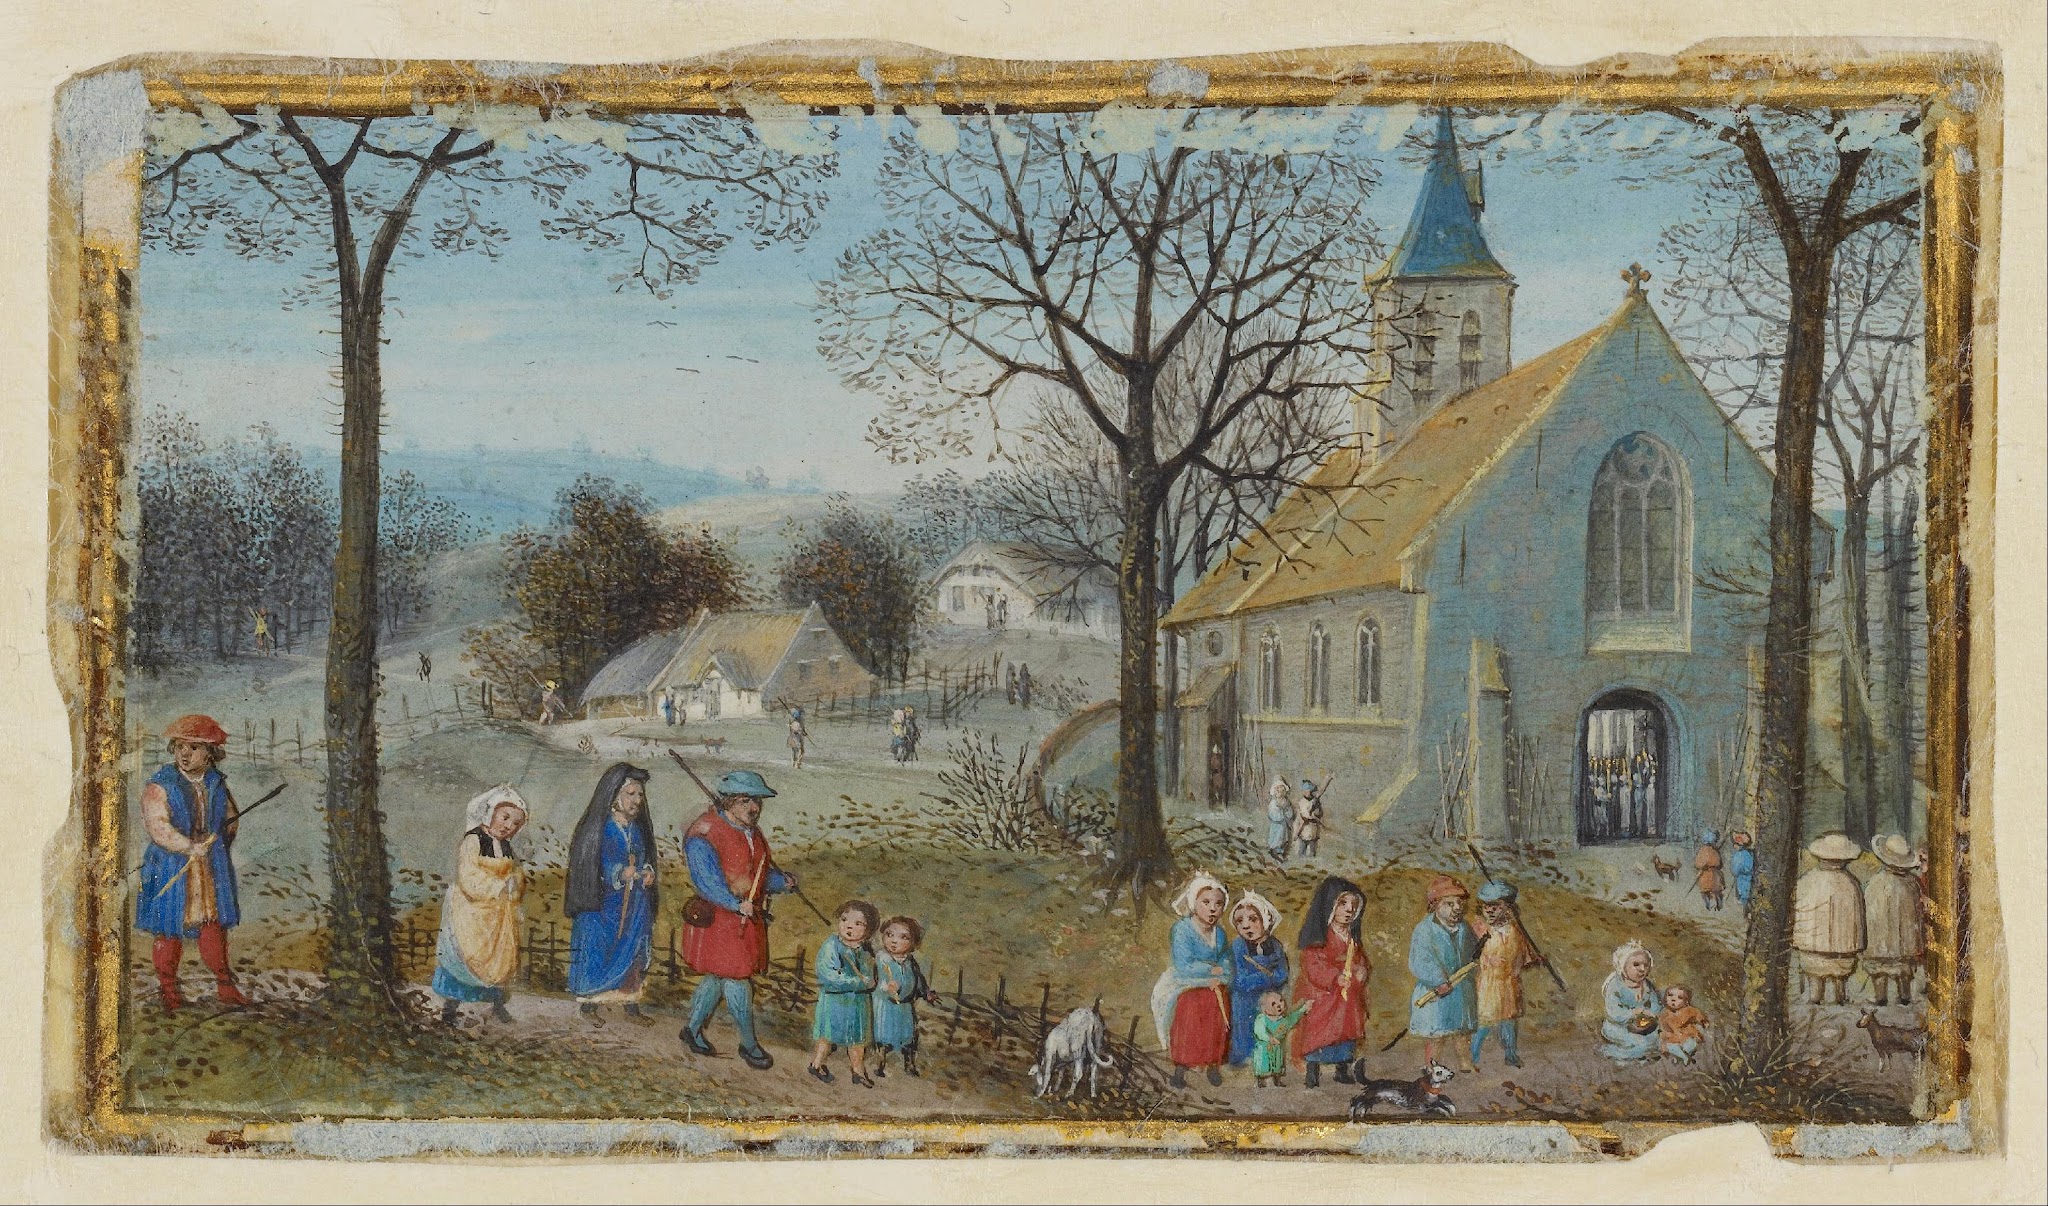 Villagers on Their Way to Church, c. 1550